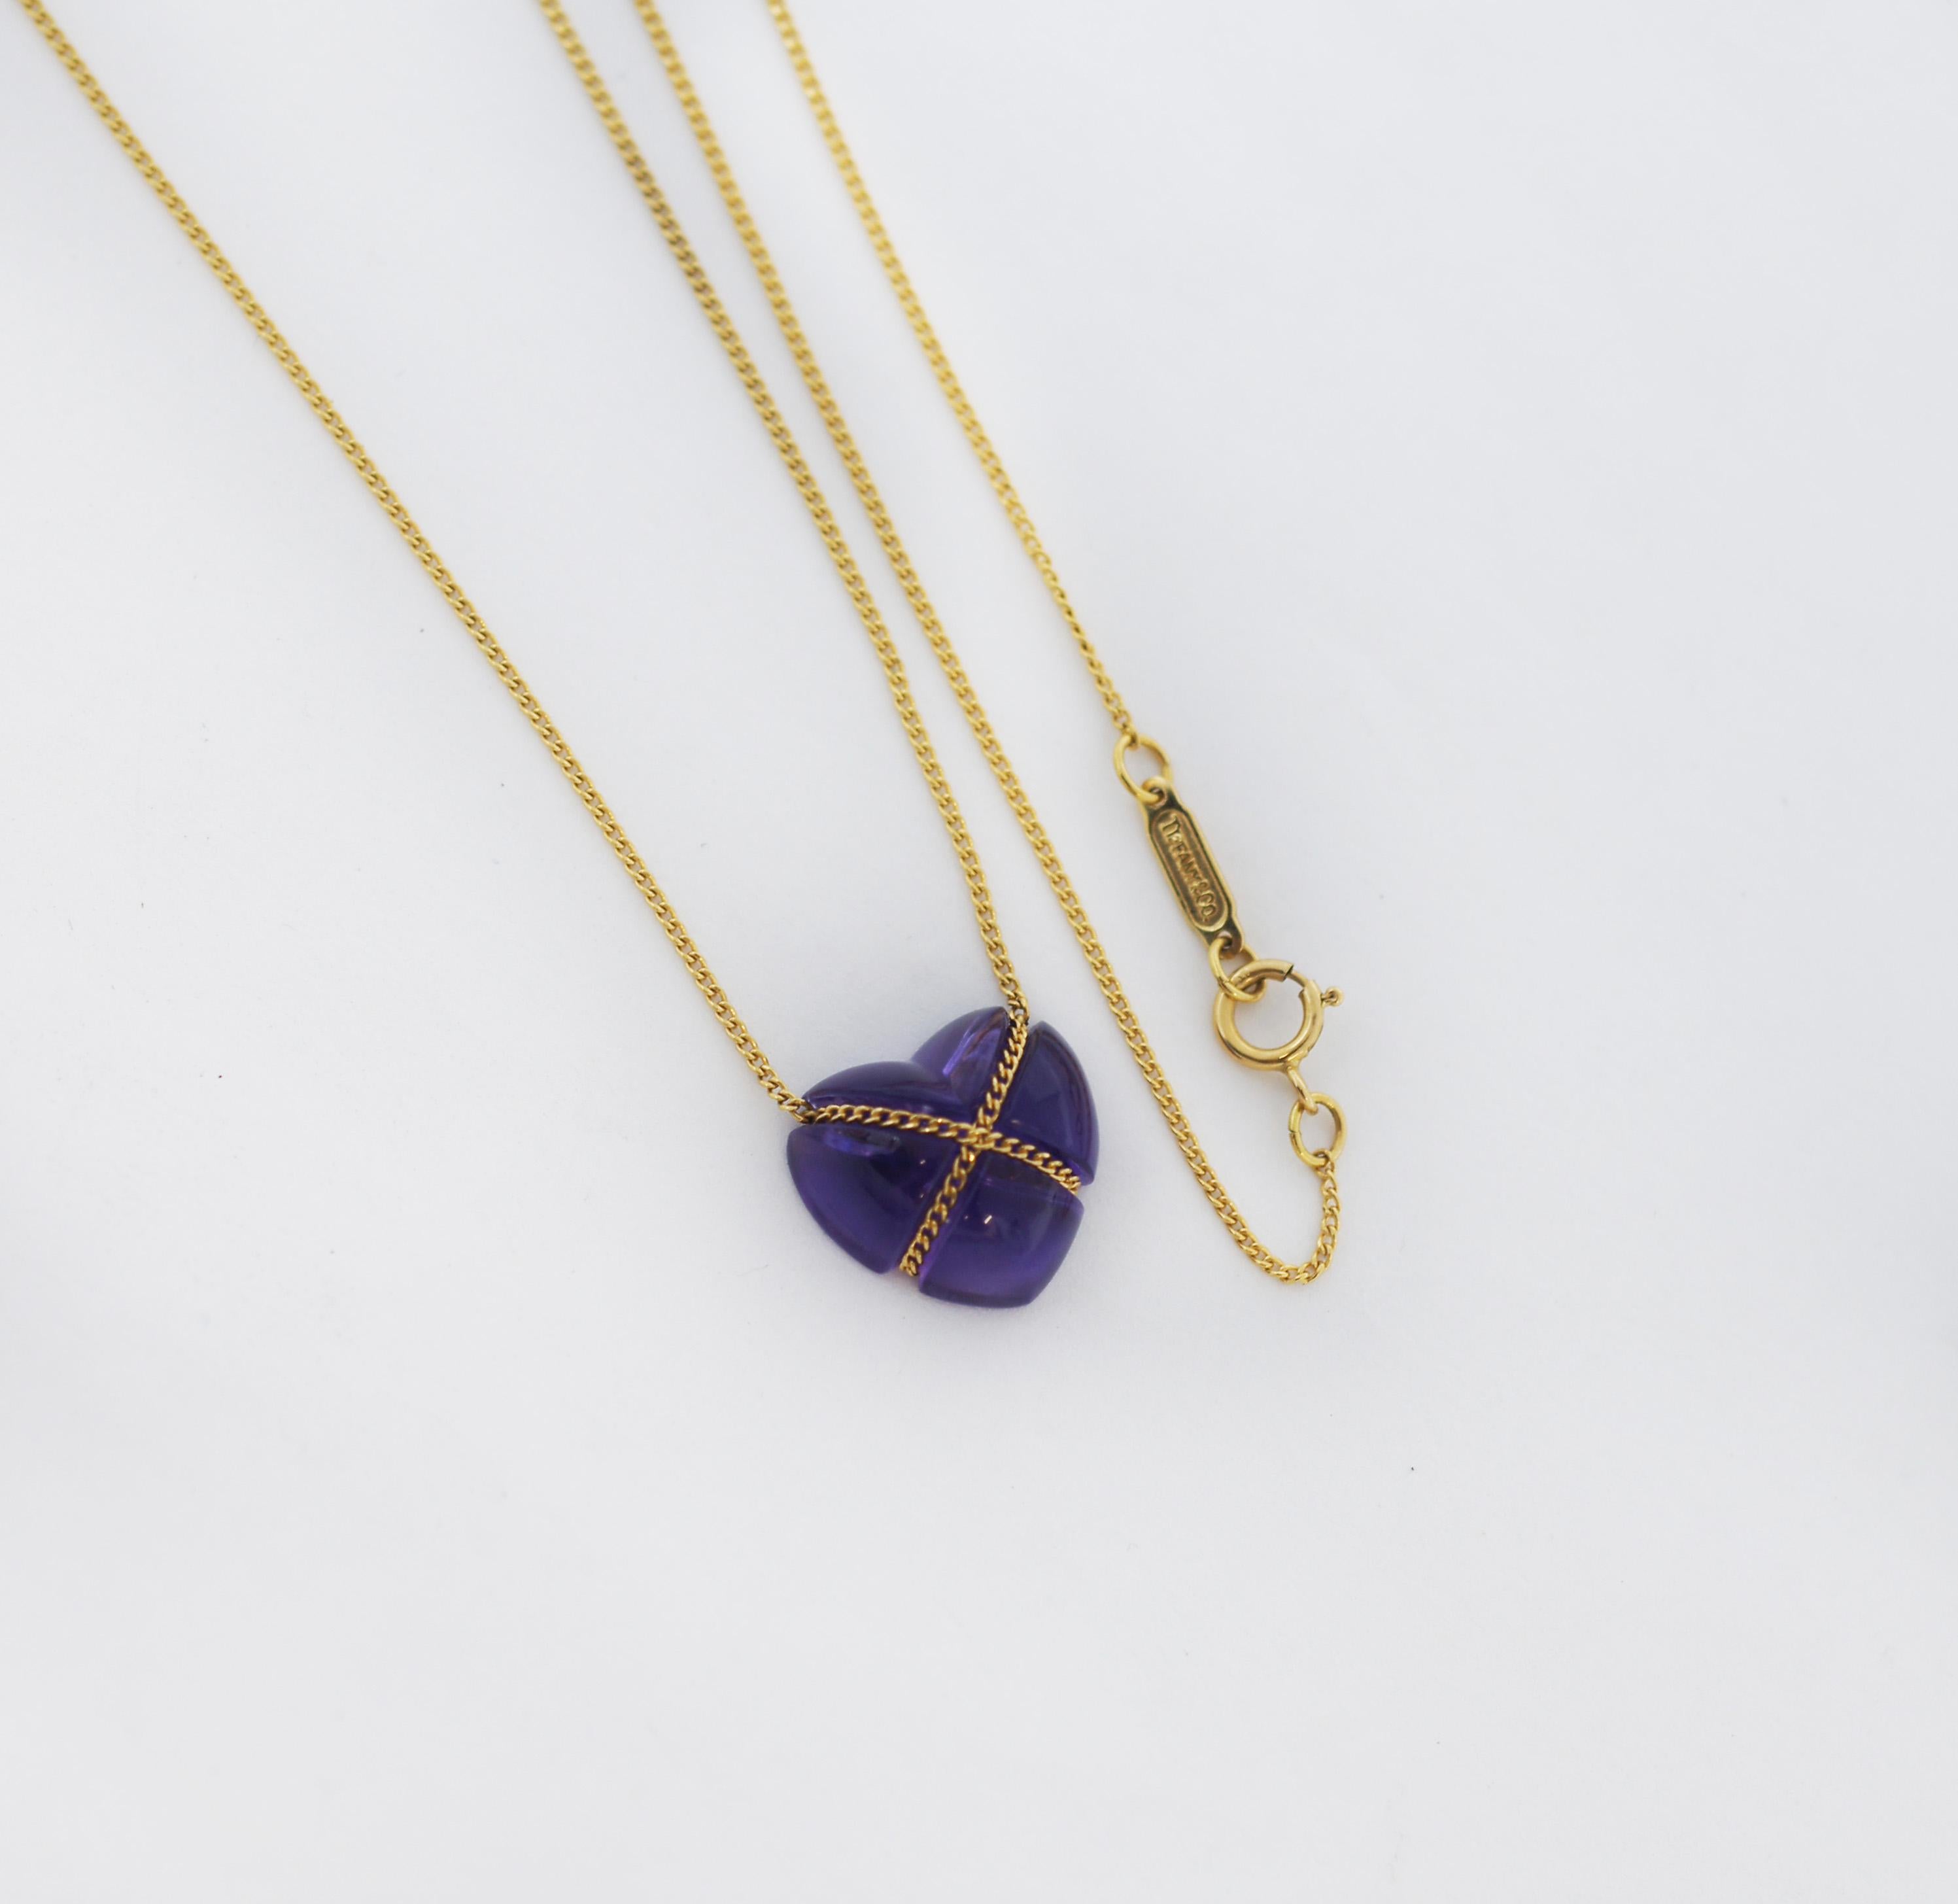 Tiffany & Co.
Vintage Cross My Hear Necklace
Classic curb chain necklace centers an amethyst heart cabochon
Bright purple and translucent with natural inclusions
Tightly wrapped with curb chain in an X motif
Necklace completes with a spring ring